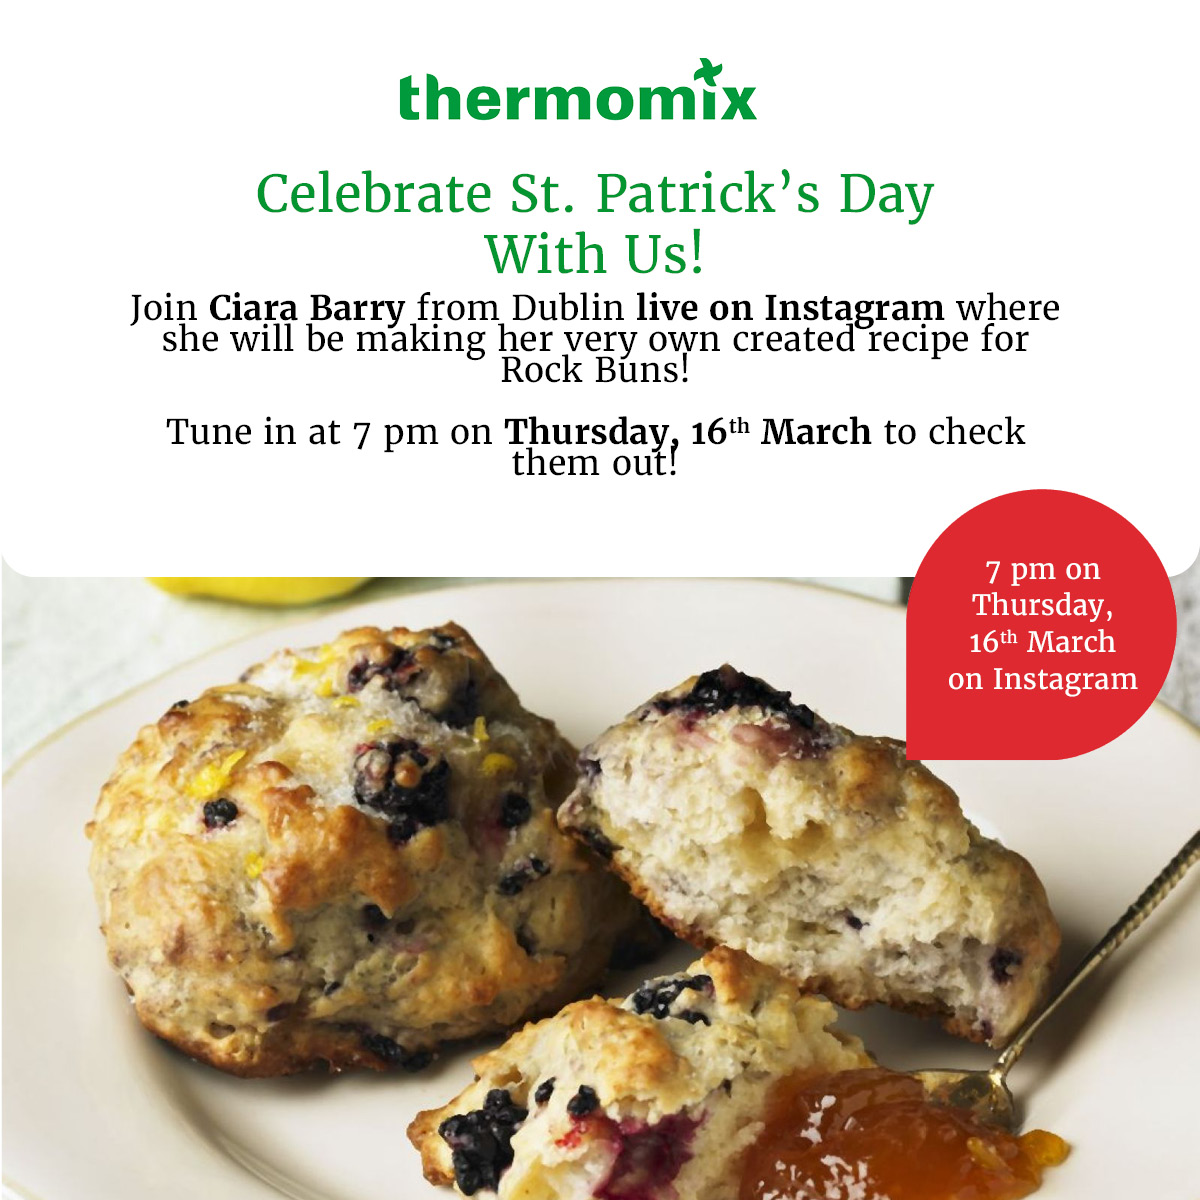 Join us tomorrow night, Thursday 16th March for a very special St. Patricks Day live cooking session with the lovely Ciara! Ciara will be making her own special recipe for an Irish classic, Rock Buns! Head over to our Instagram to check it out at 7 pm!